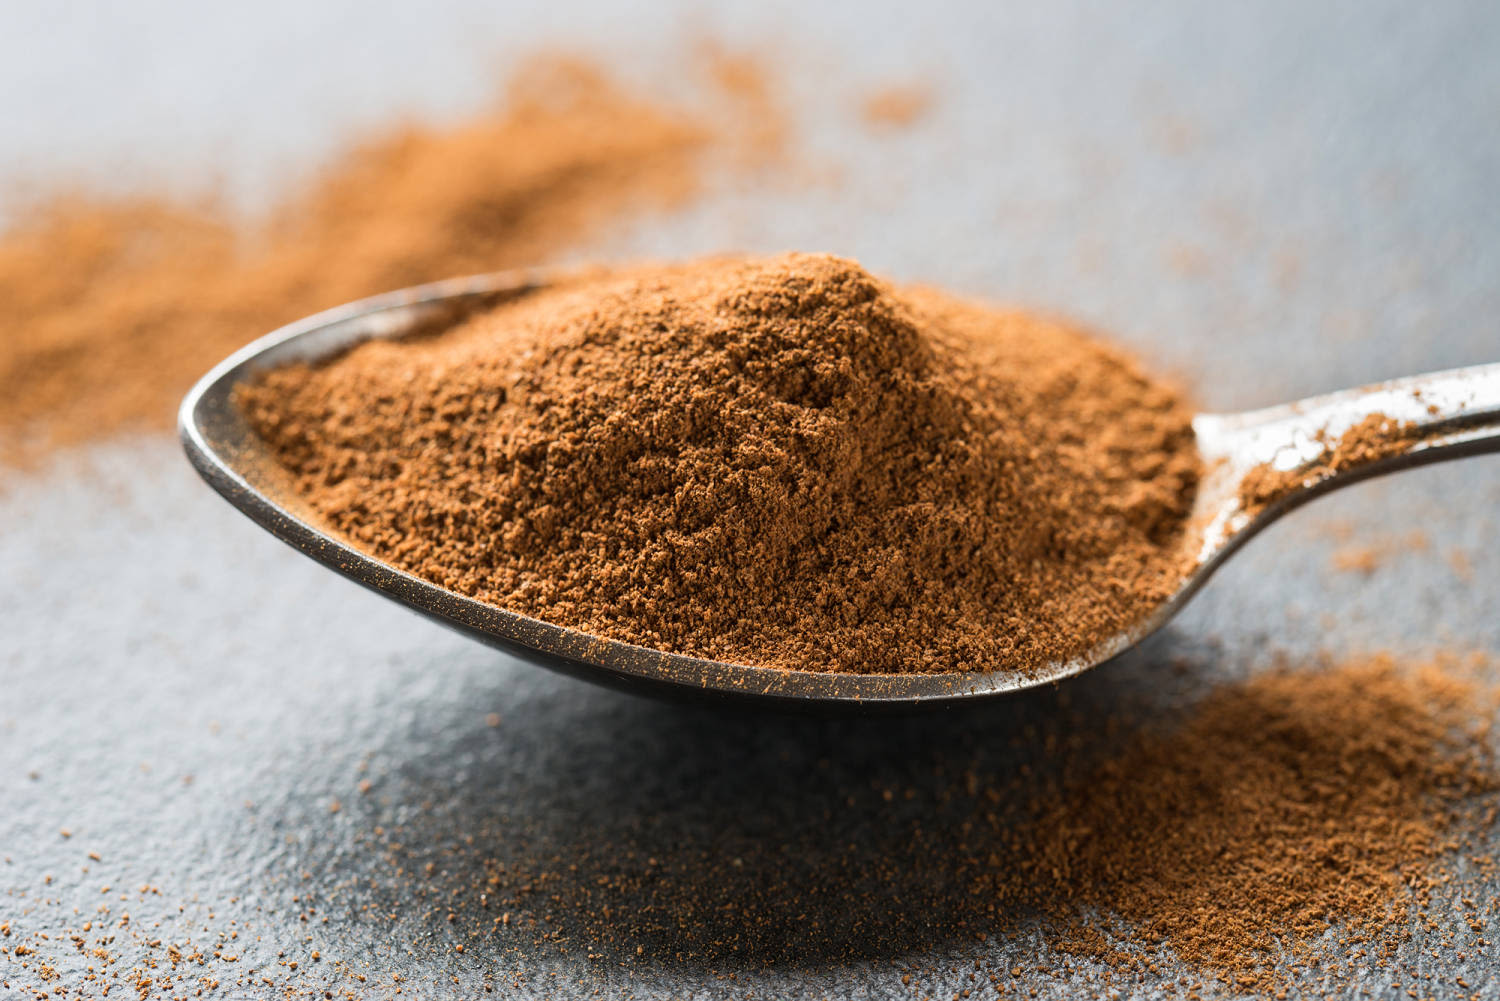 FDA issues new alert about lead contamination in cinnamon